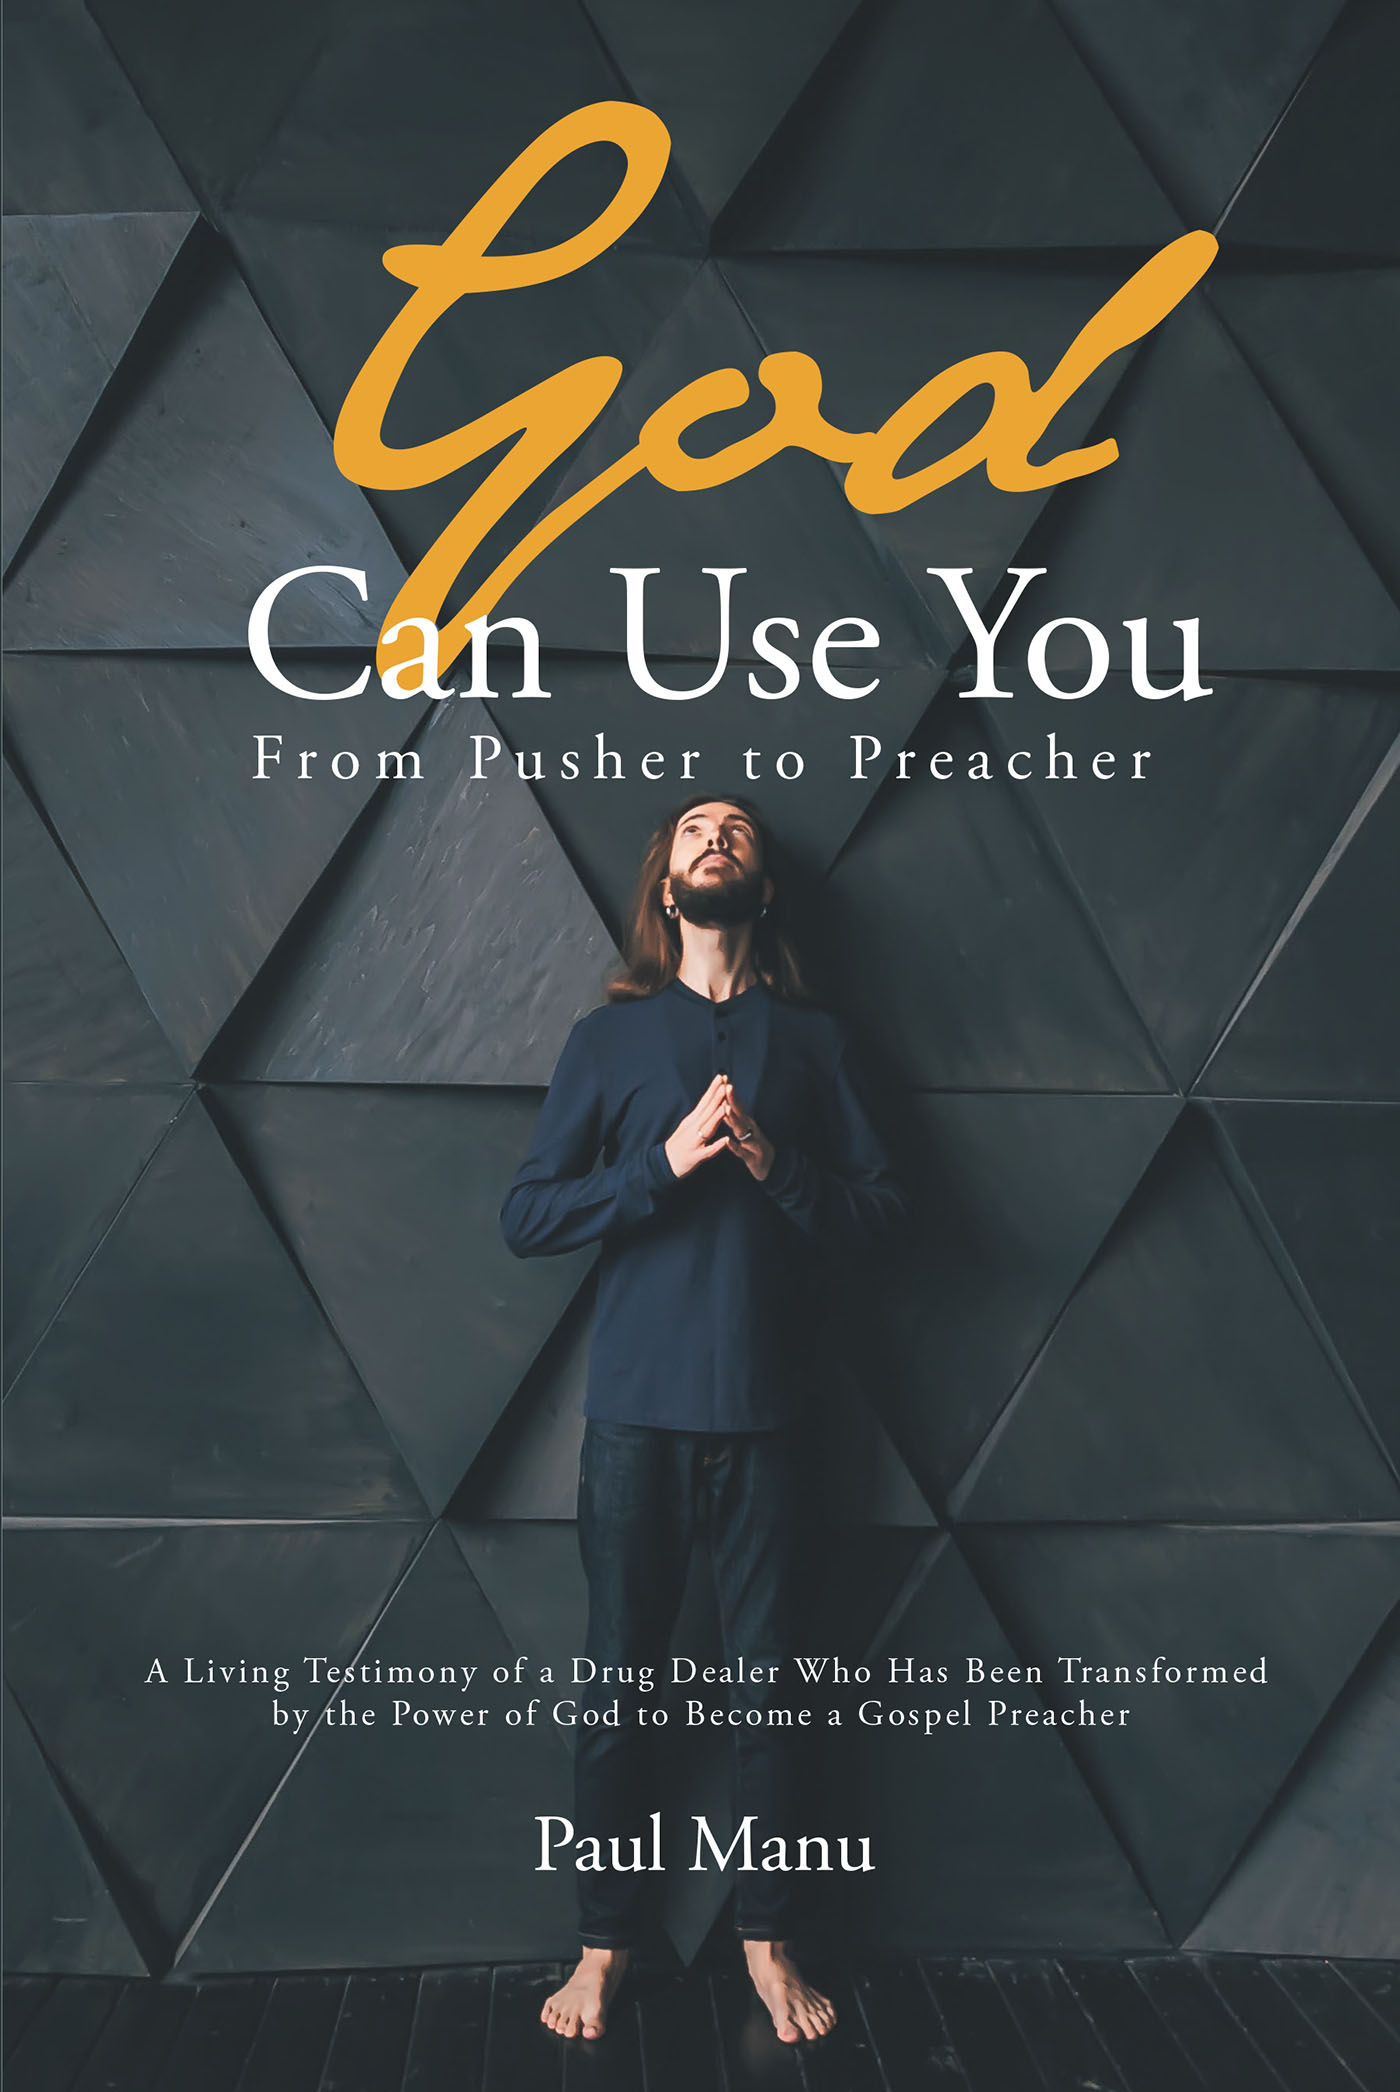 Paul Manu’s Newly Released "God Can Use You: From Pusher to Preacher" is an Engrossing Account of One Man’s Path to Salvation